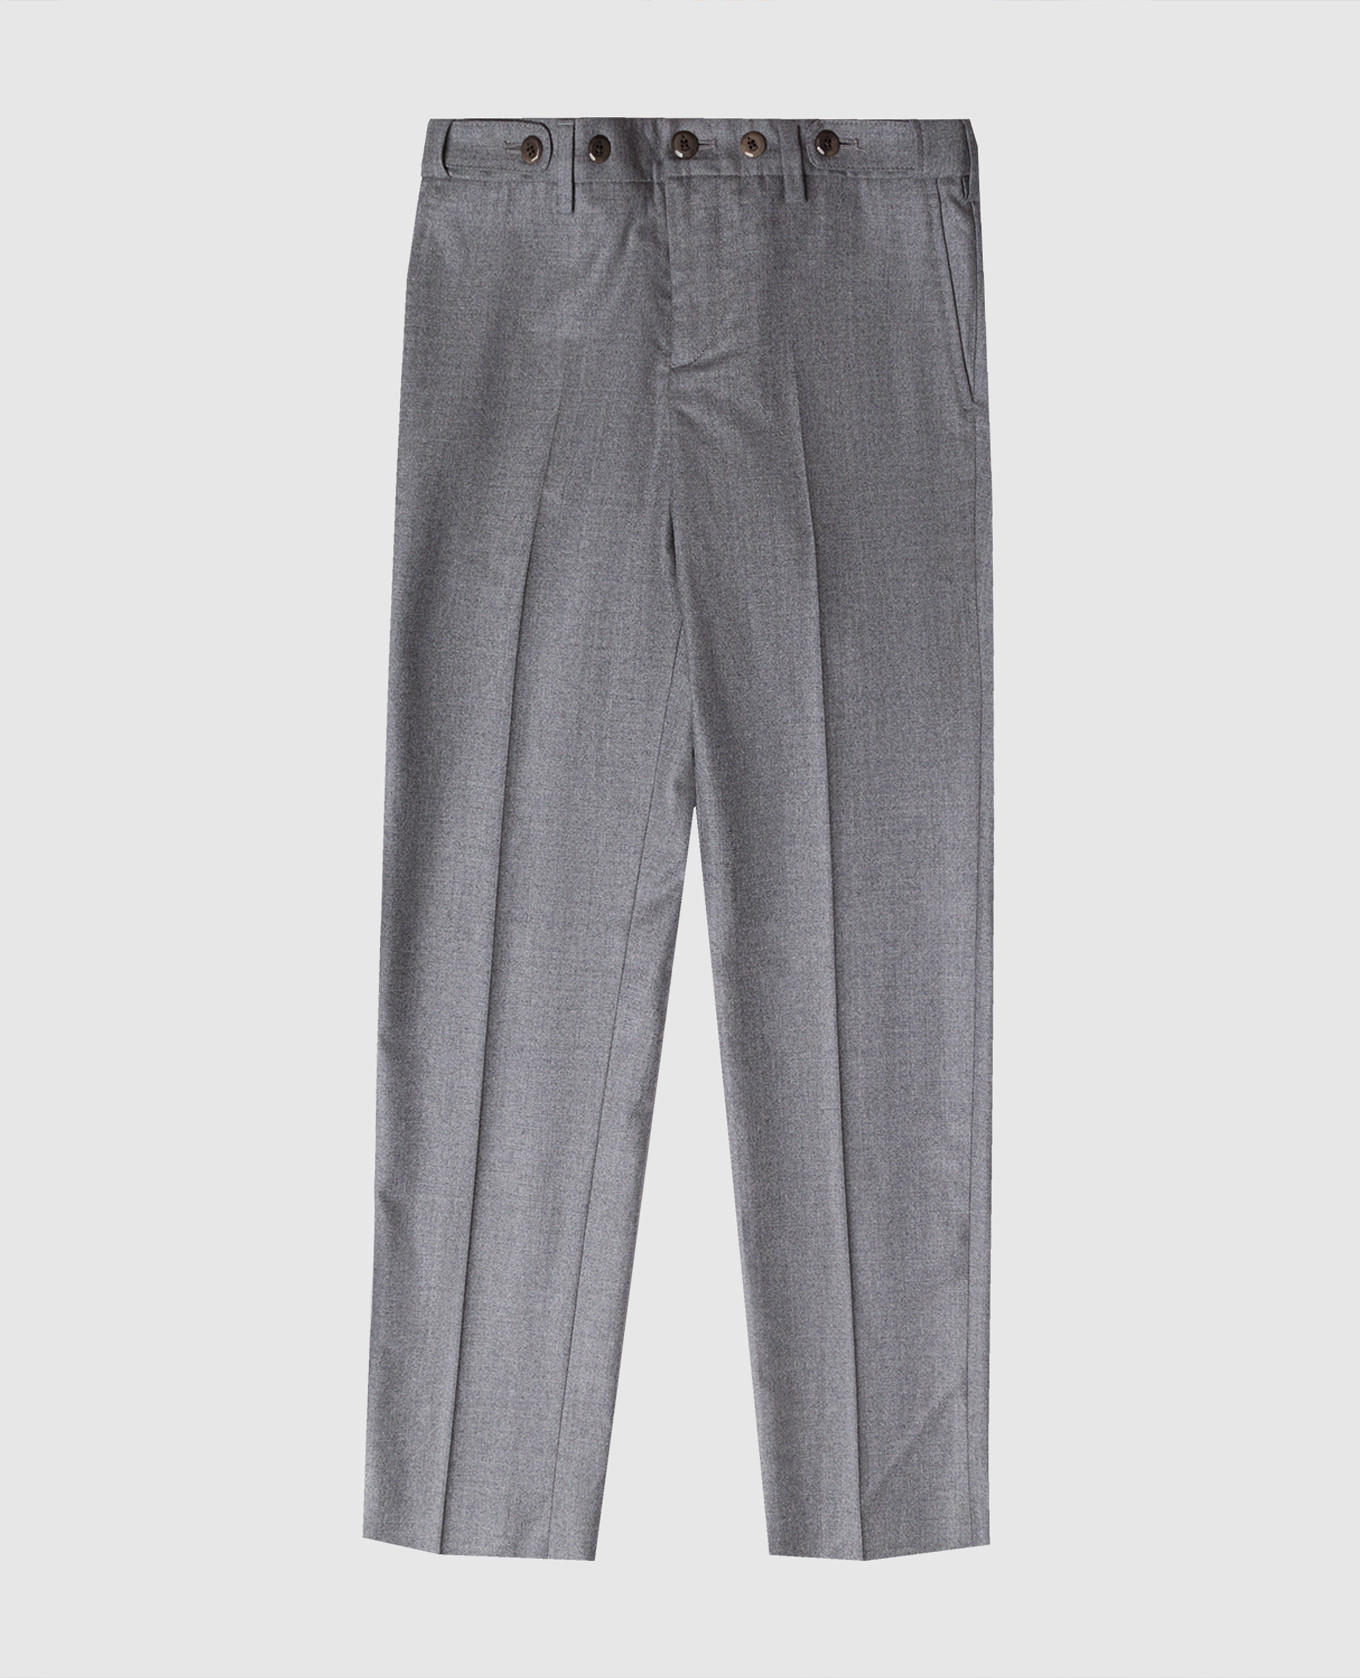 Children's gray pants made of wool